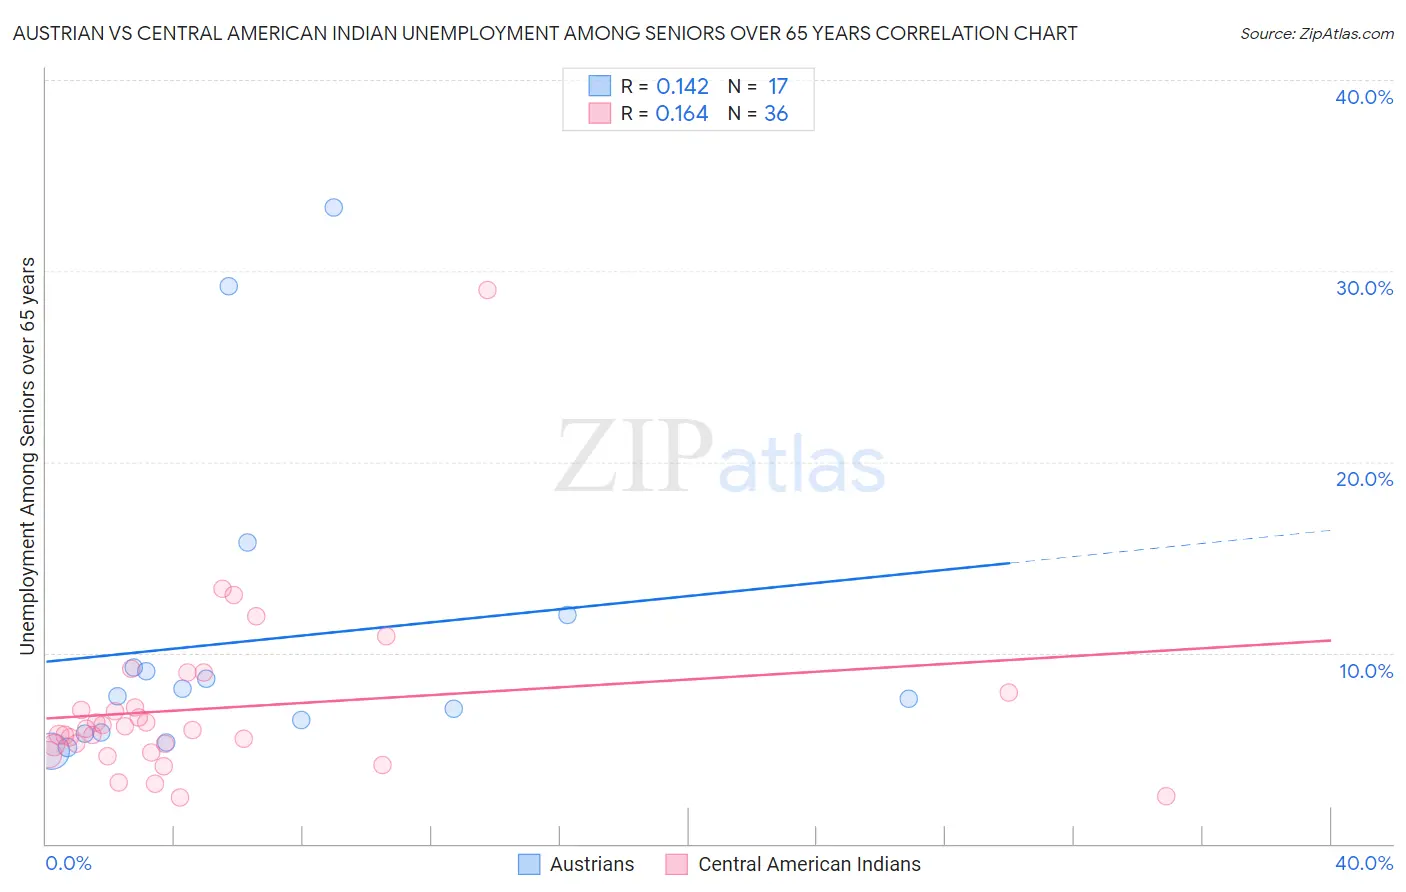 Austrian vs Central American Indian Unemployment Among Seniors over 65 years